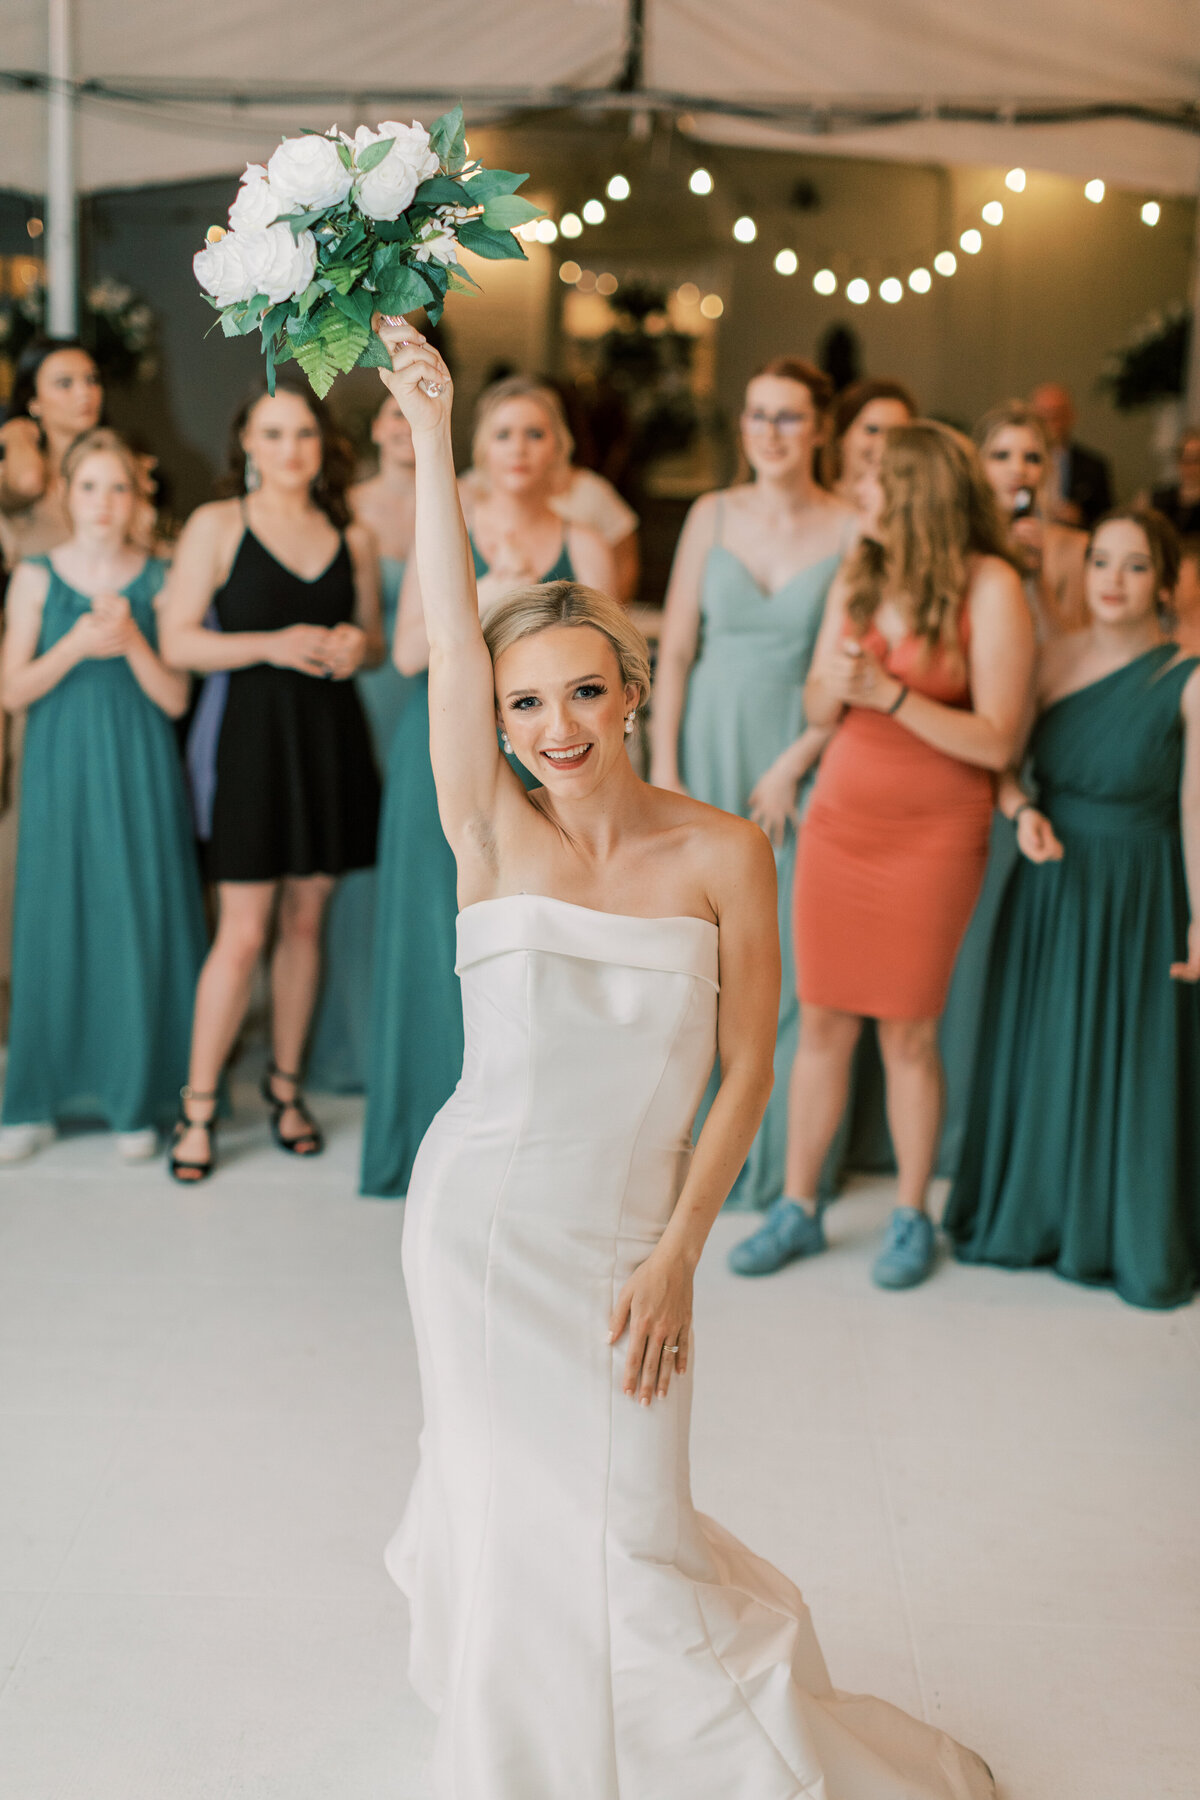 A bride throws her bouquet to the single ladies.